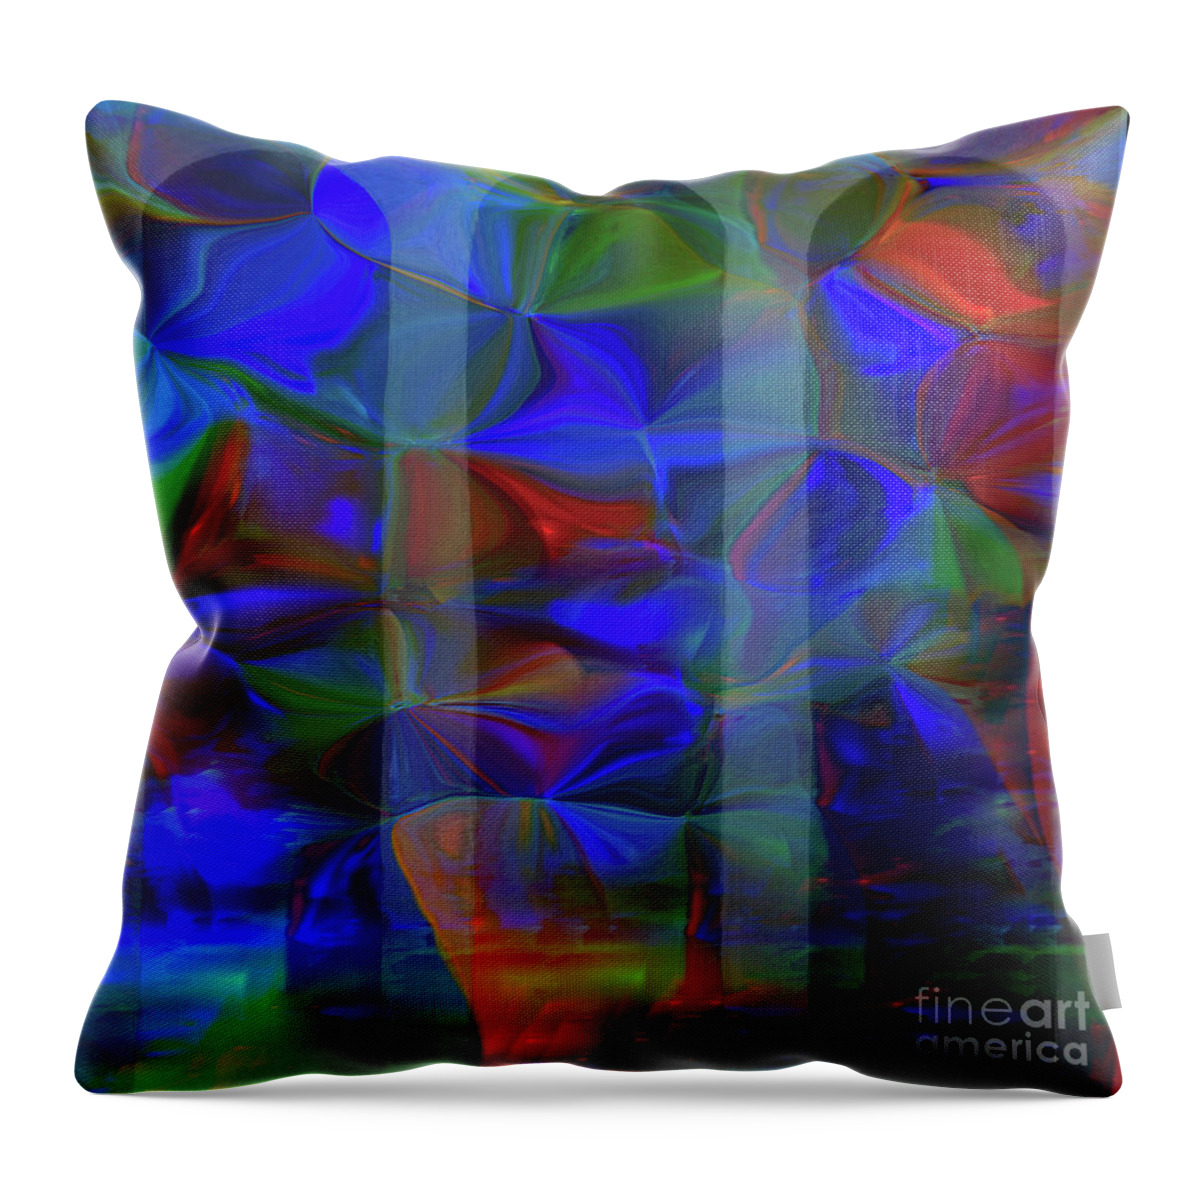 A-fine-art Throw Pillow featuring the painting In The Garden Of Shalom 14 by Catalina Walker